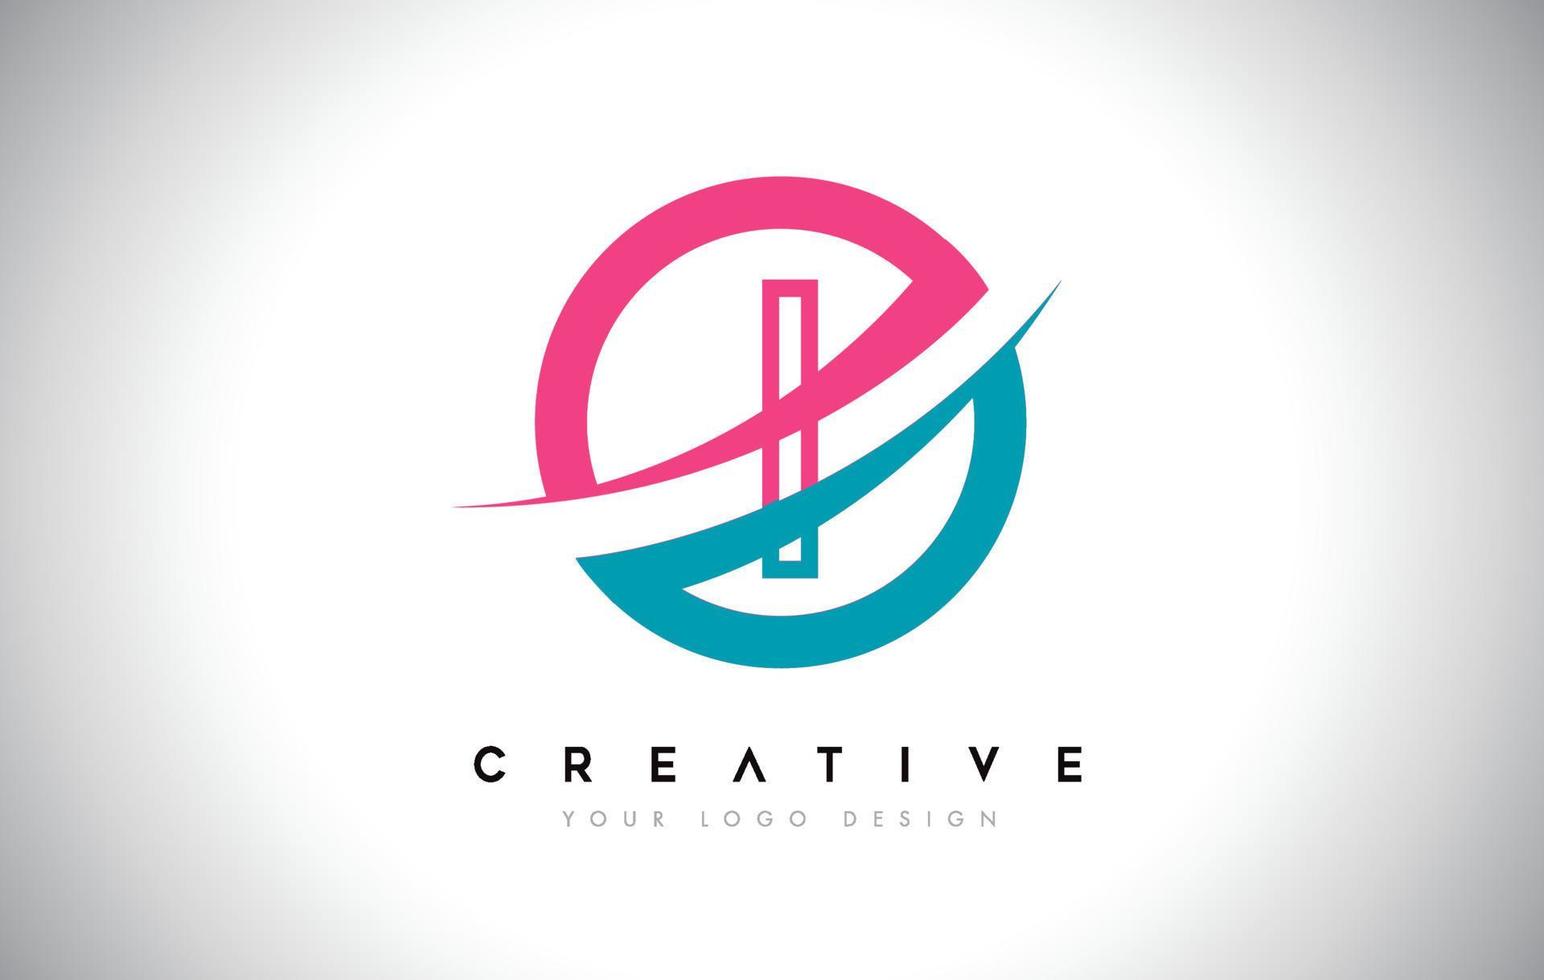 I Letter Design logo icon with circle and swoosh design Vector and blue pink color.